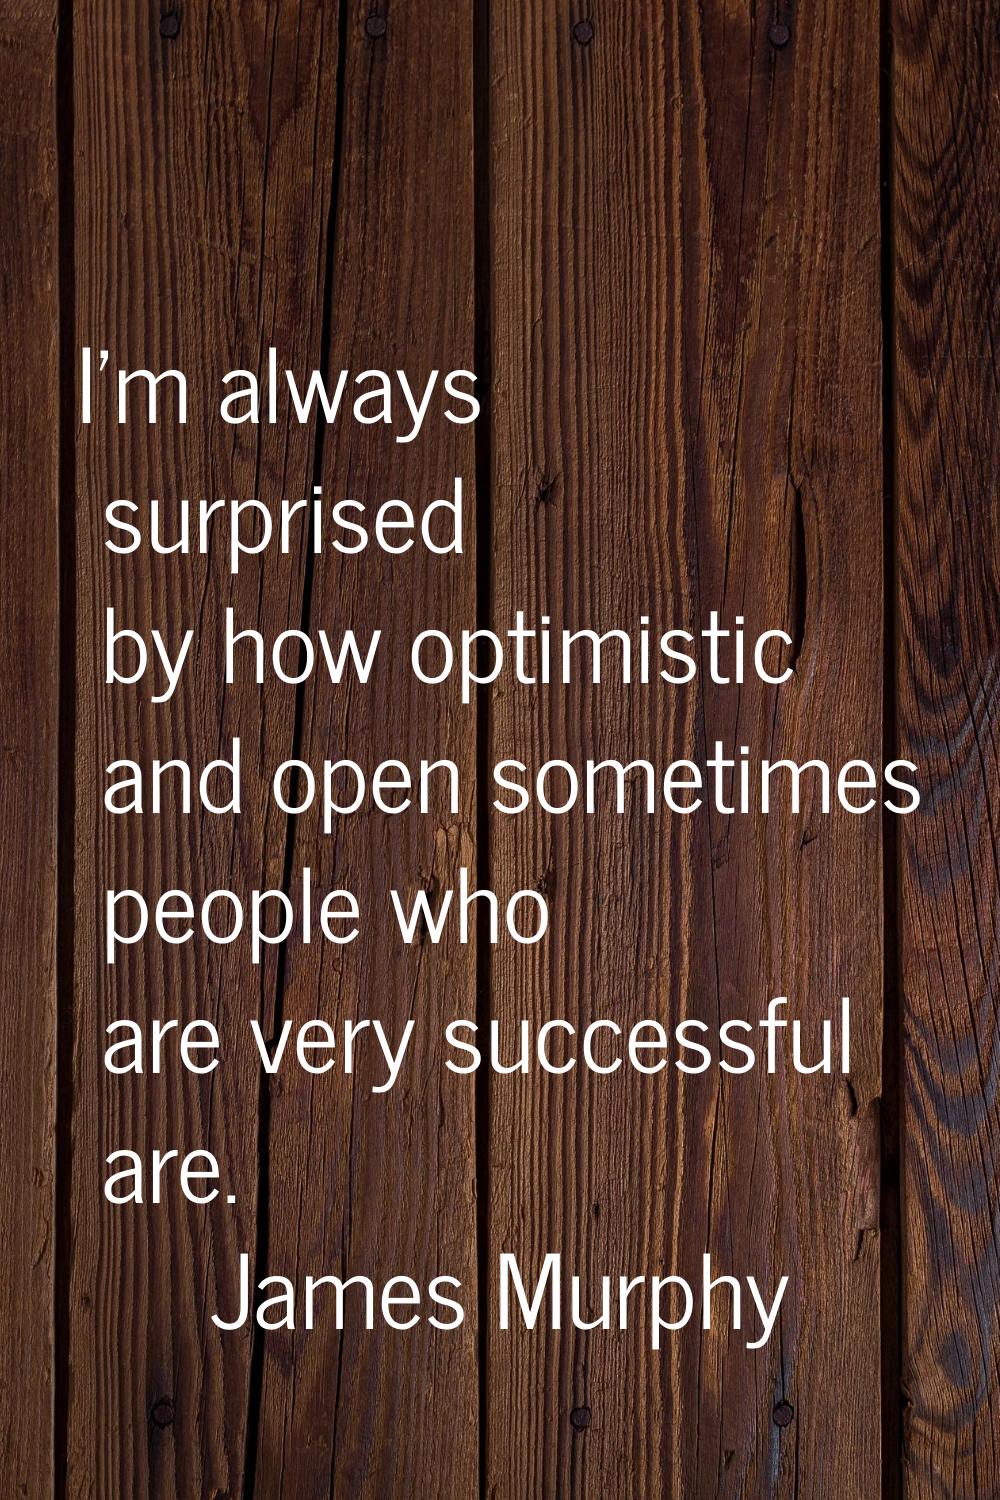 I'm always surprised by how optimistic and open sometimes people who are very successful are.